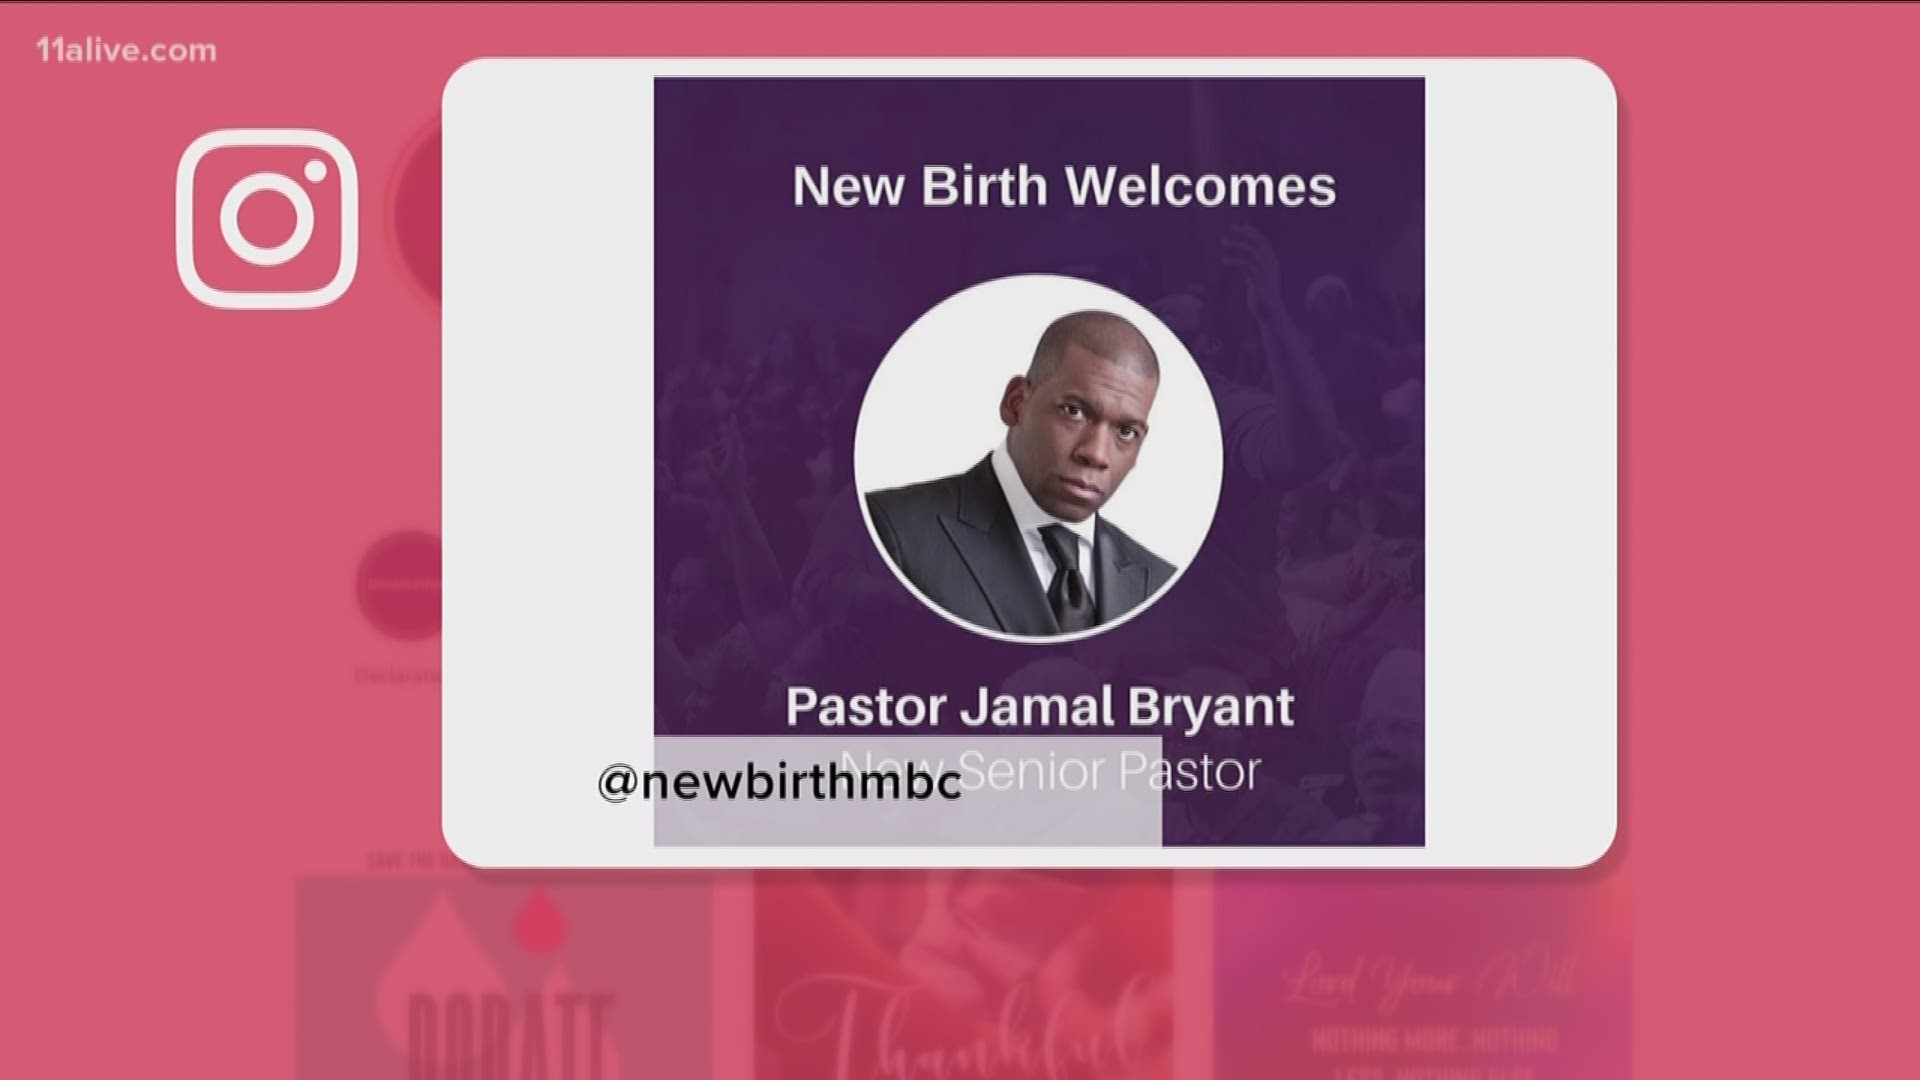 Pastor Jamal Bryant will lead the congregation at New Birth Church.